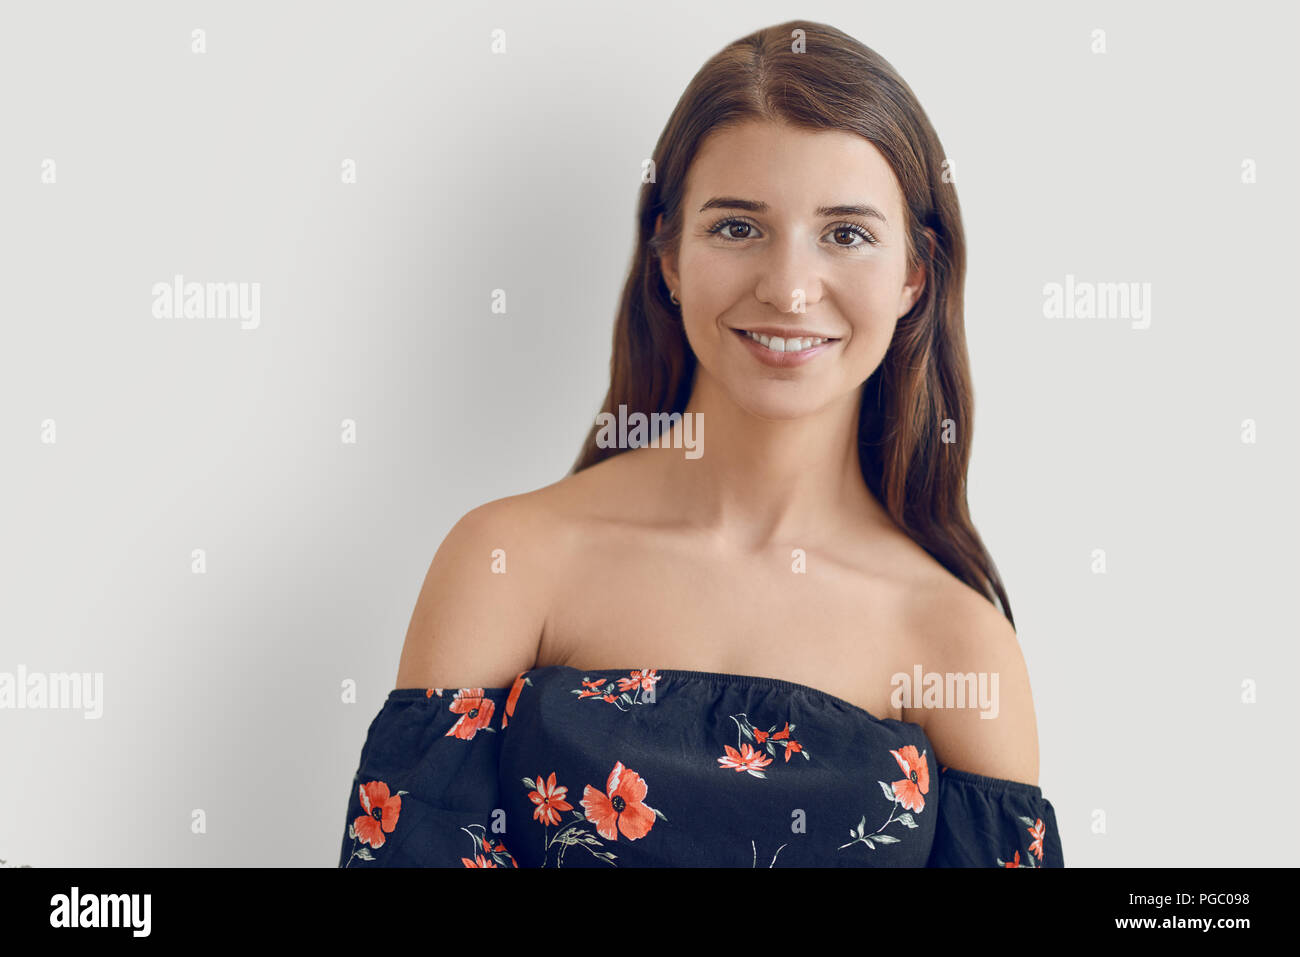 Attractive stylish woman in an off the shoulder summer dress with floral pattern standing against a white background with folded arms looking at the c Stock Photo